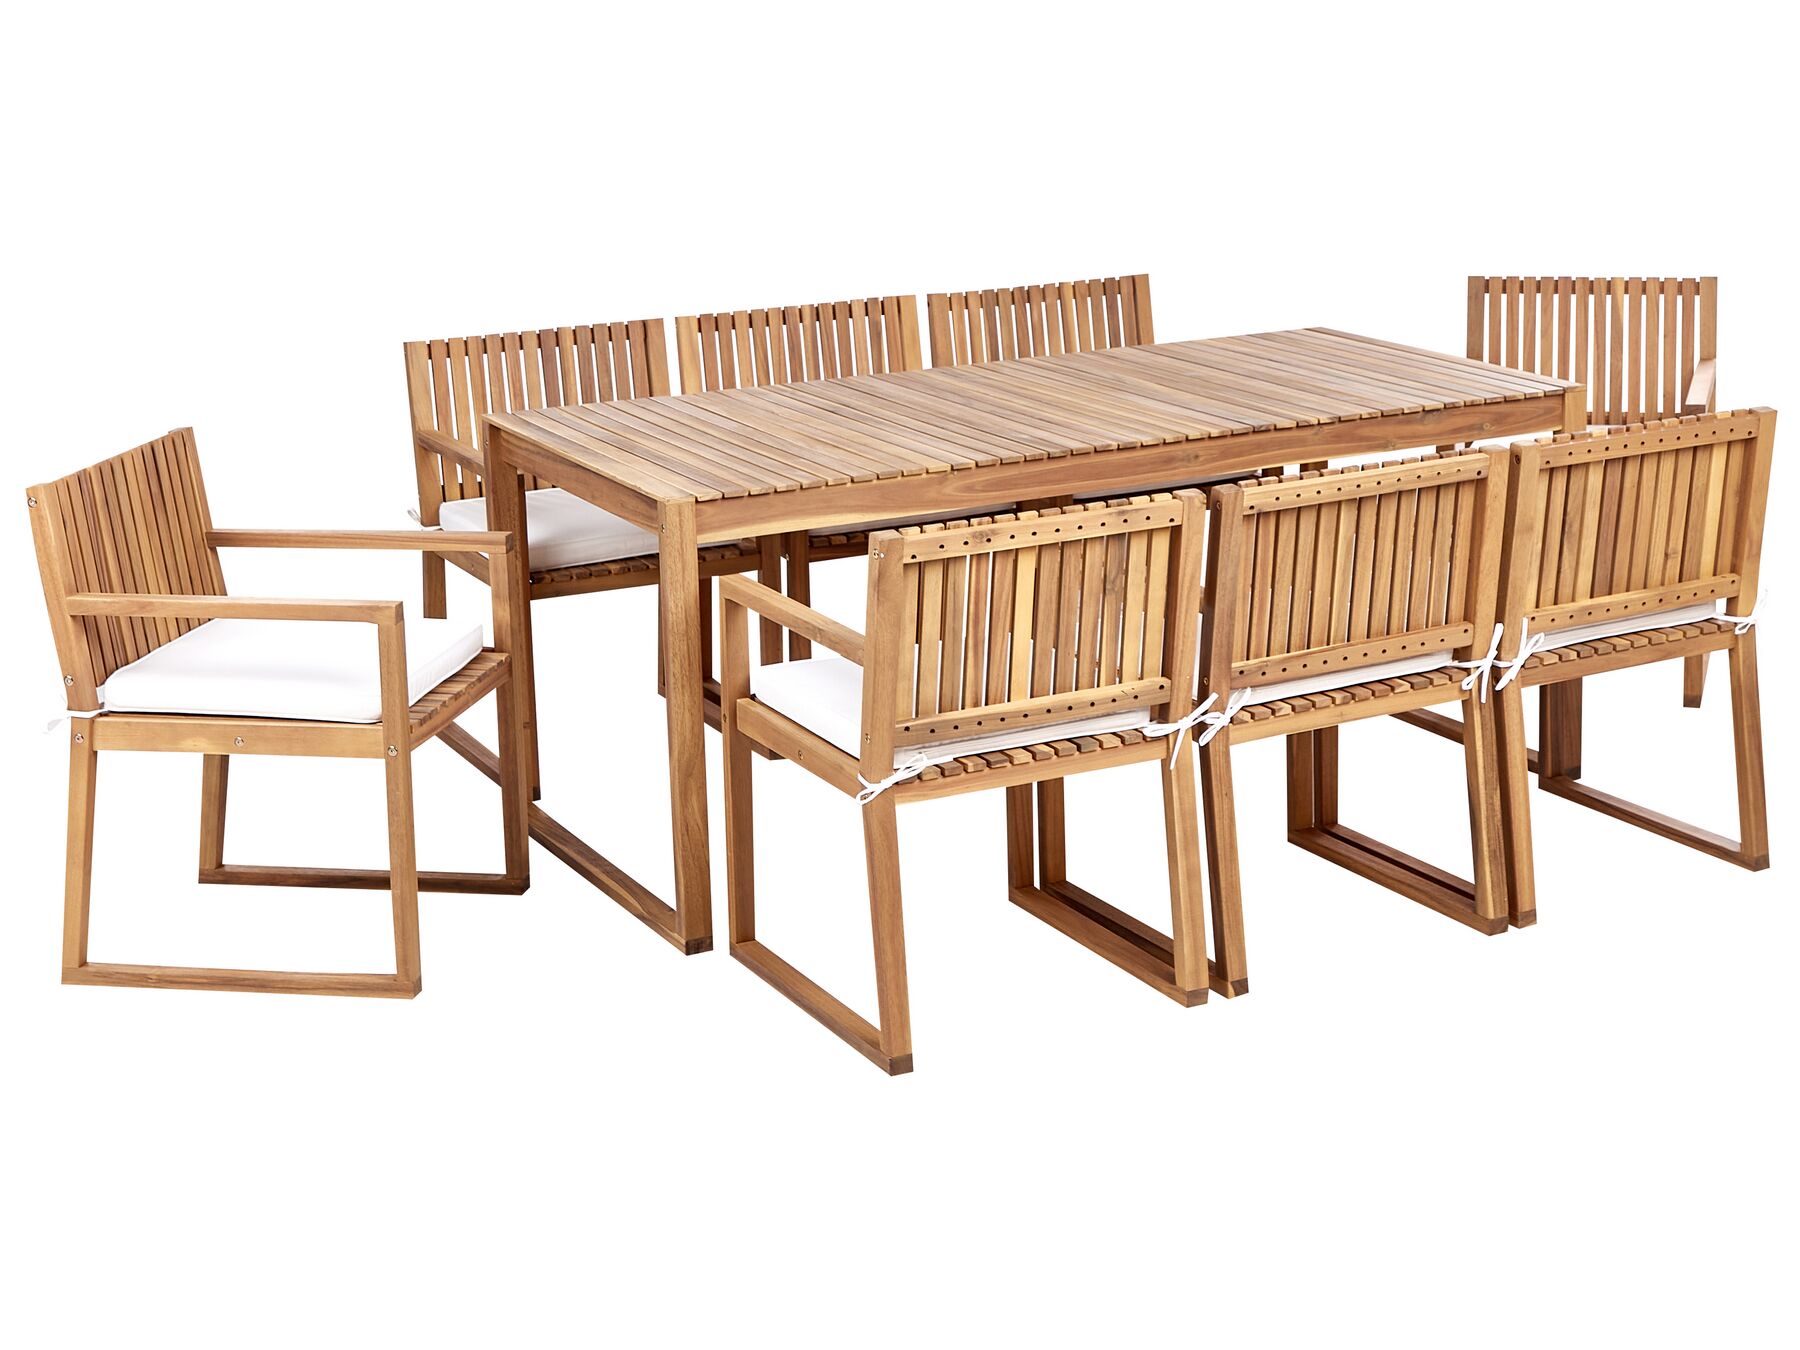 8 Seater Certified Acacia Wood Garden Dining Set with Off-White Cushions SASSARI II_924081